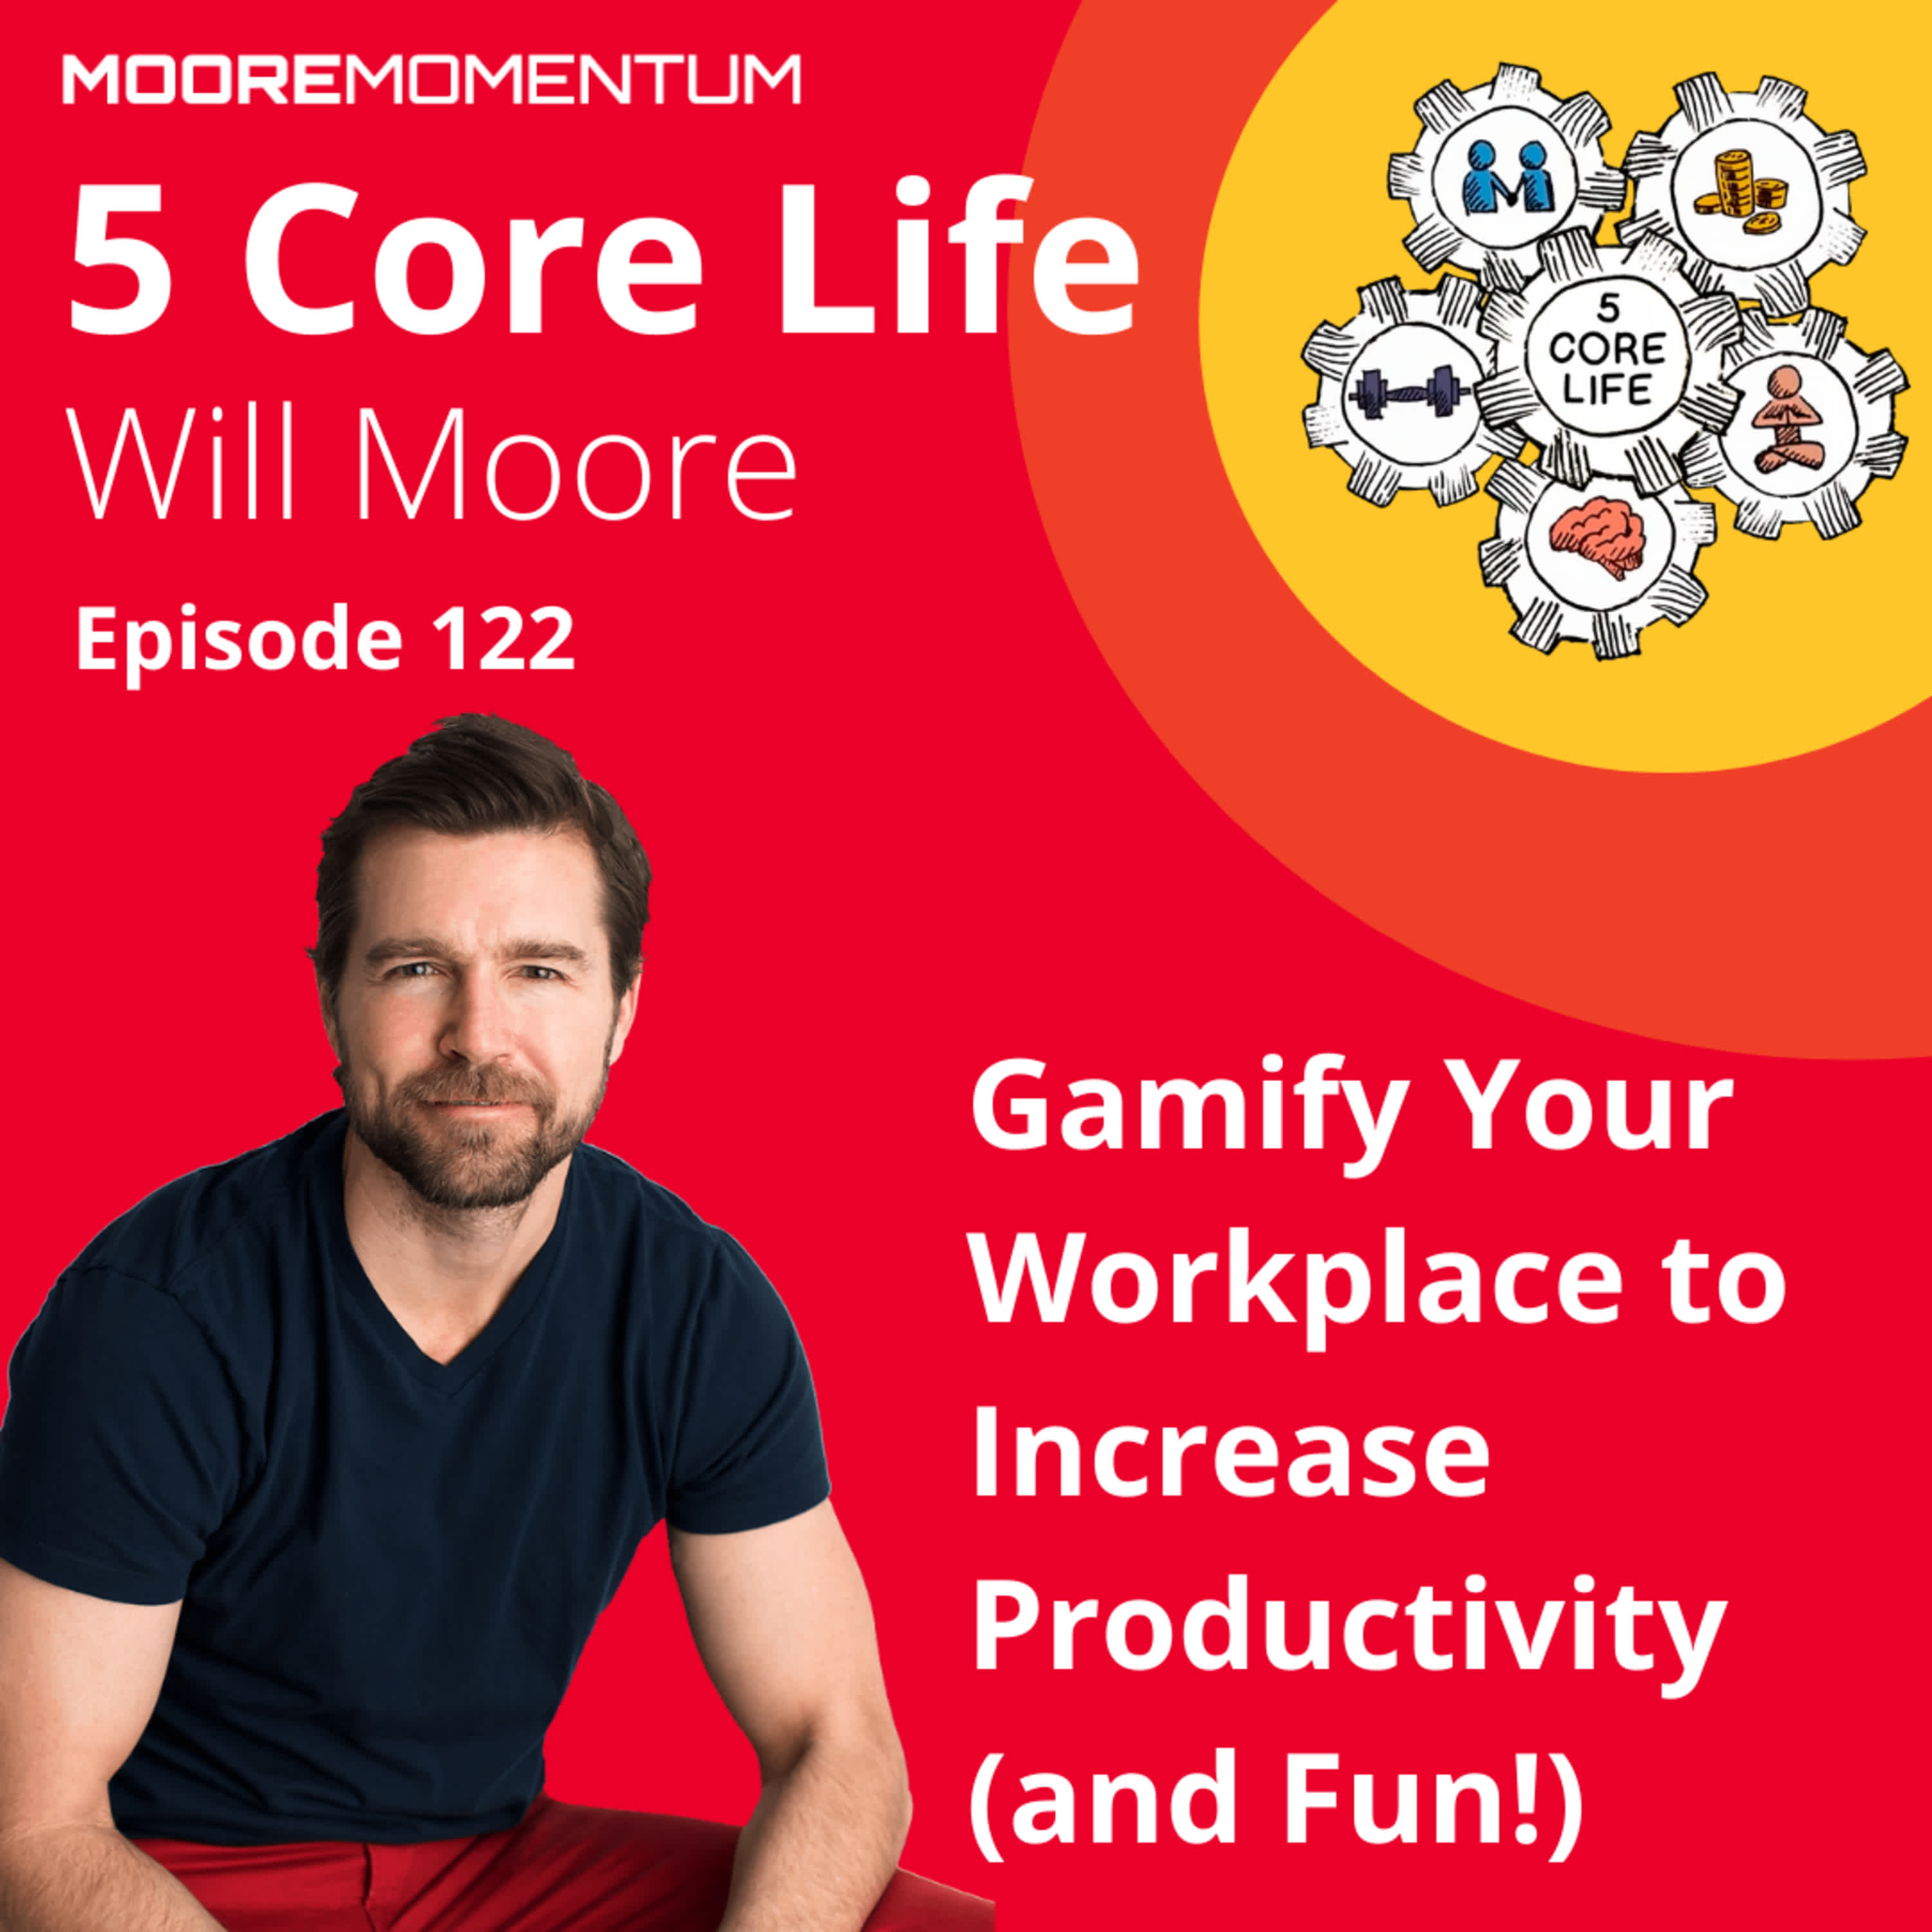 Gamify Your Workplace to Increase Productivity (and Fun!)